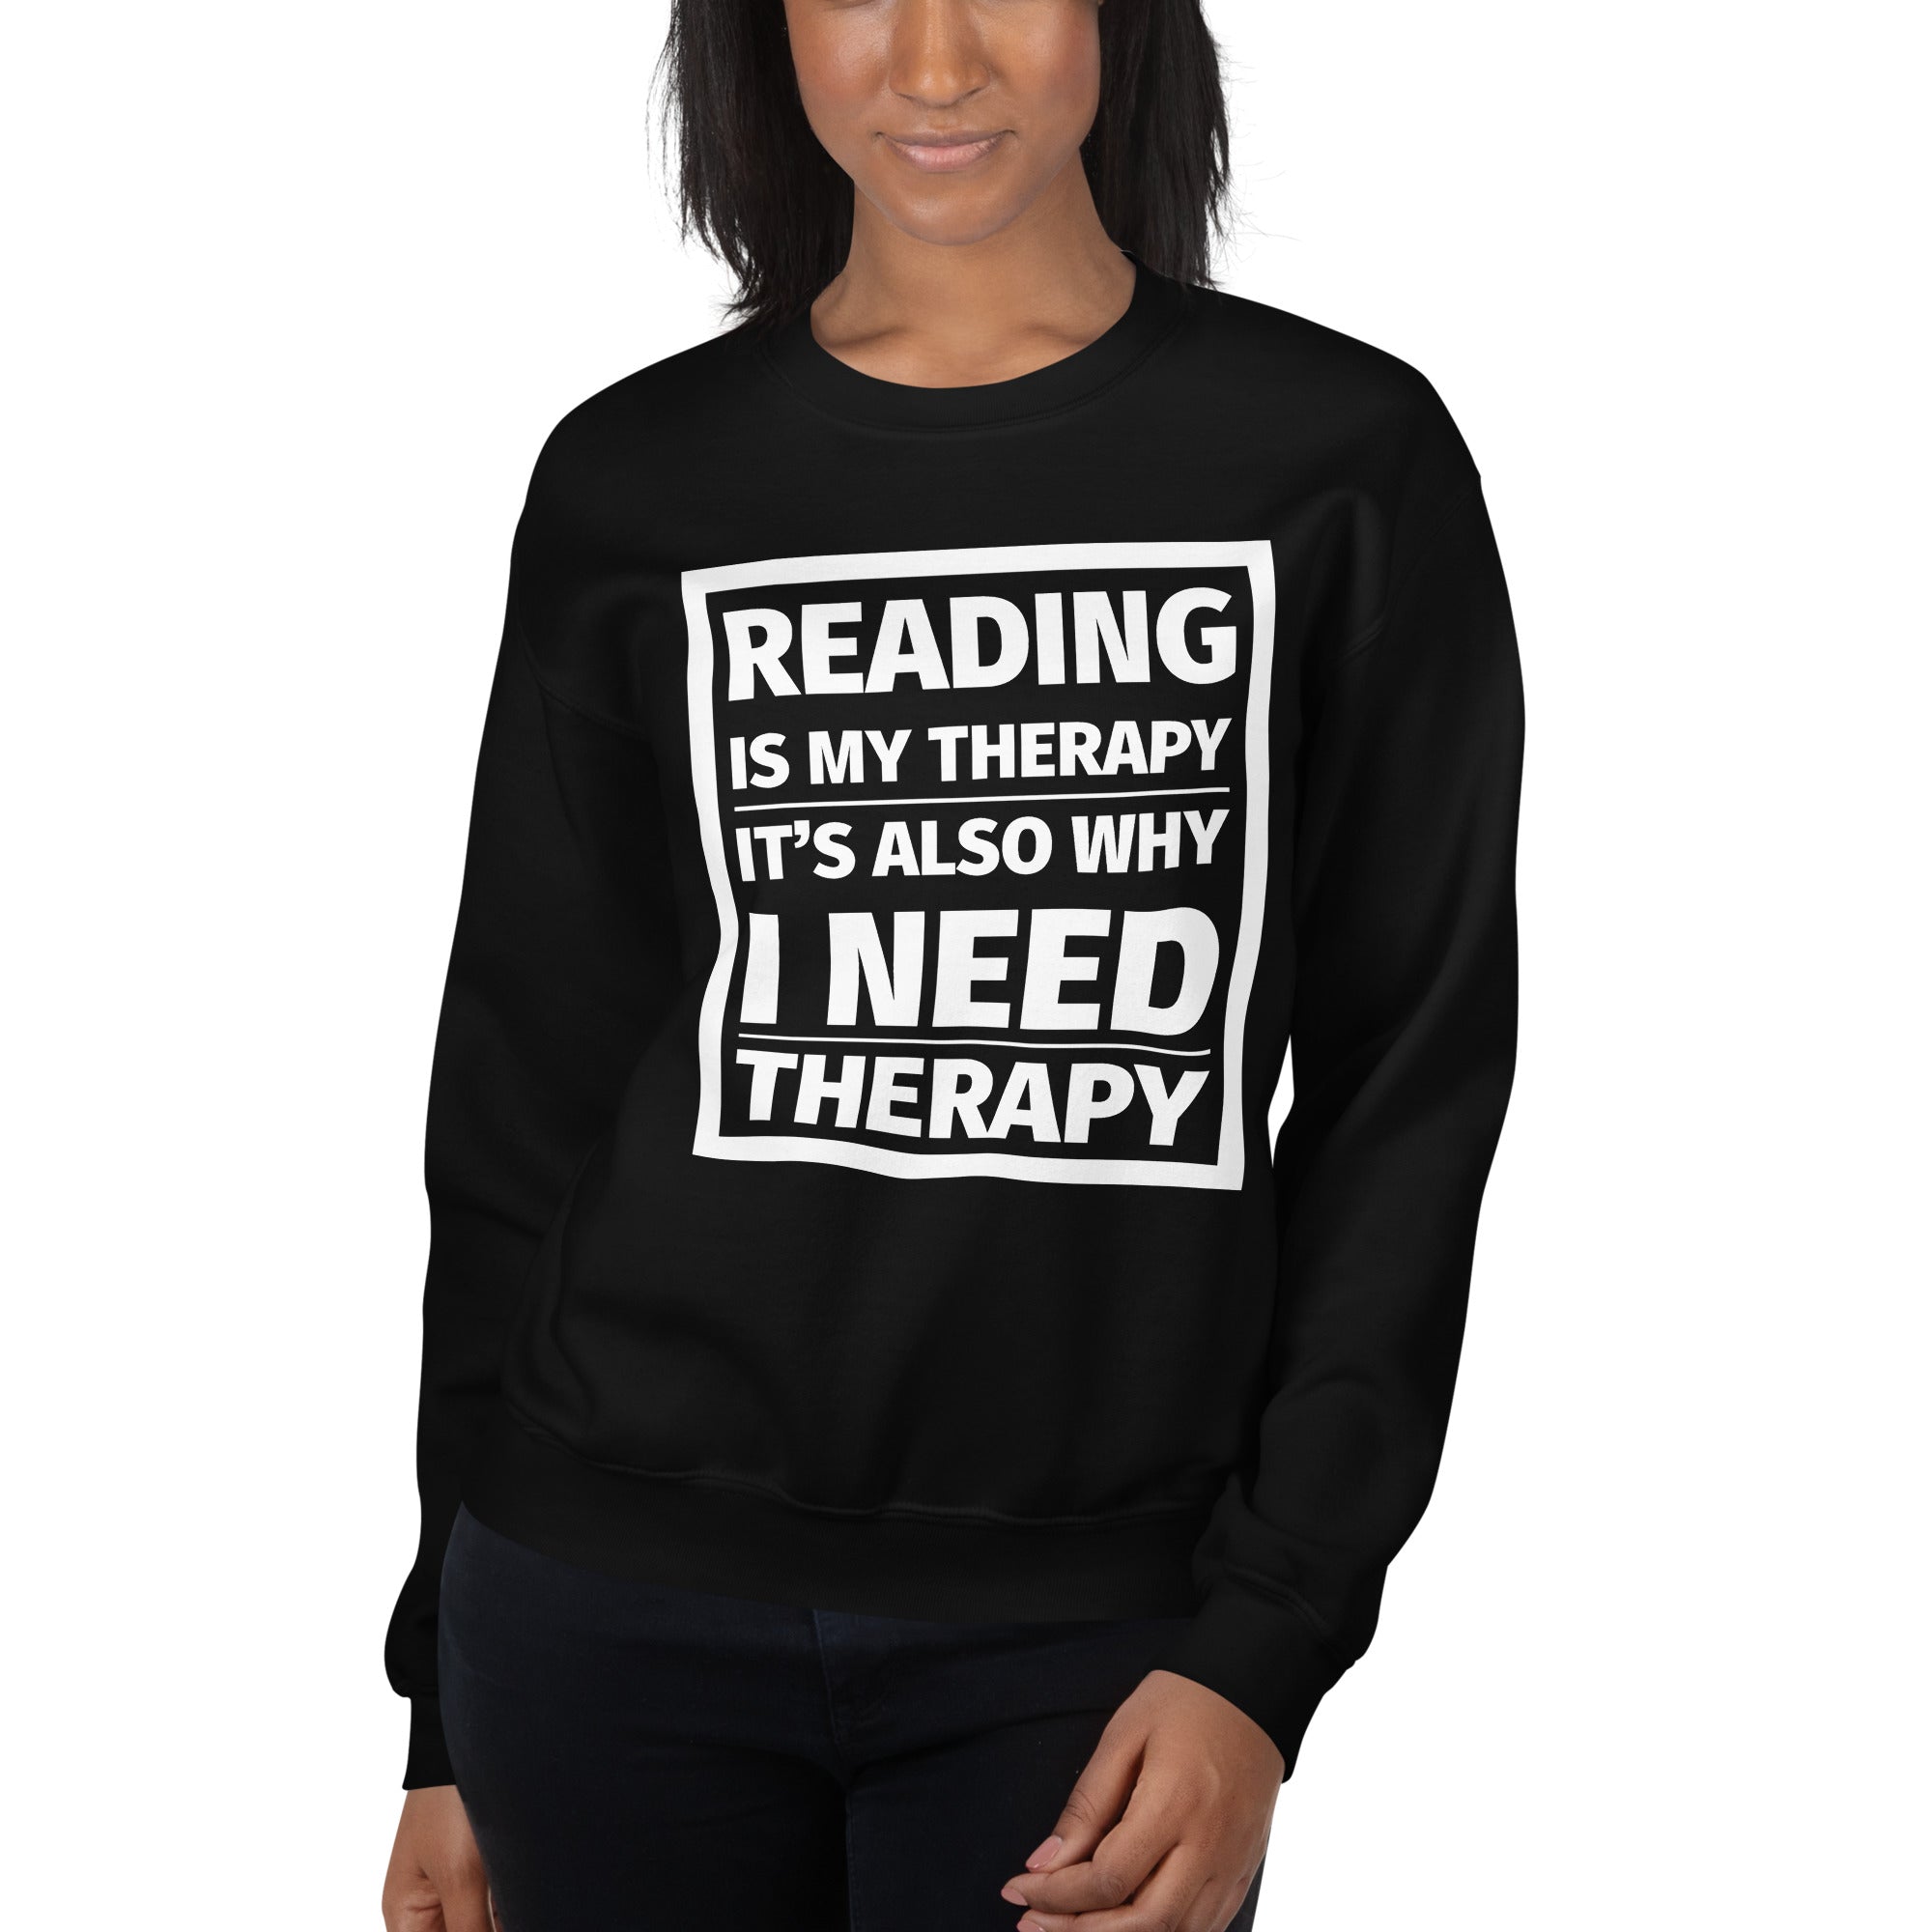 READING IS MY THERAPY Unisex Sweatshirt - Literary Lifestyle Company